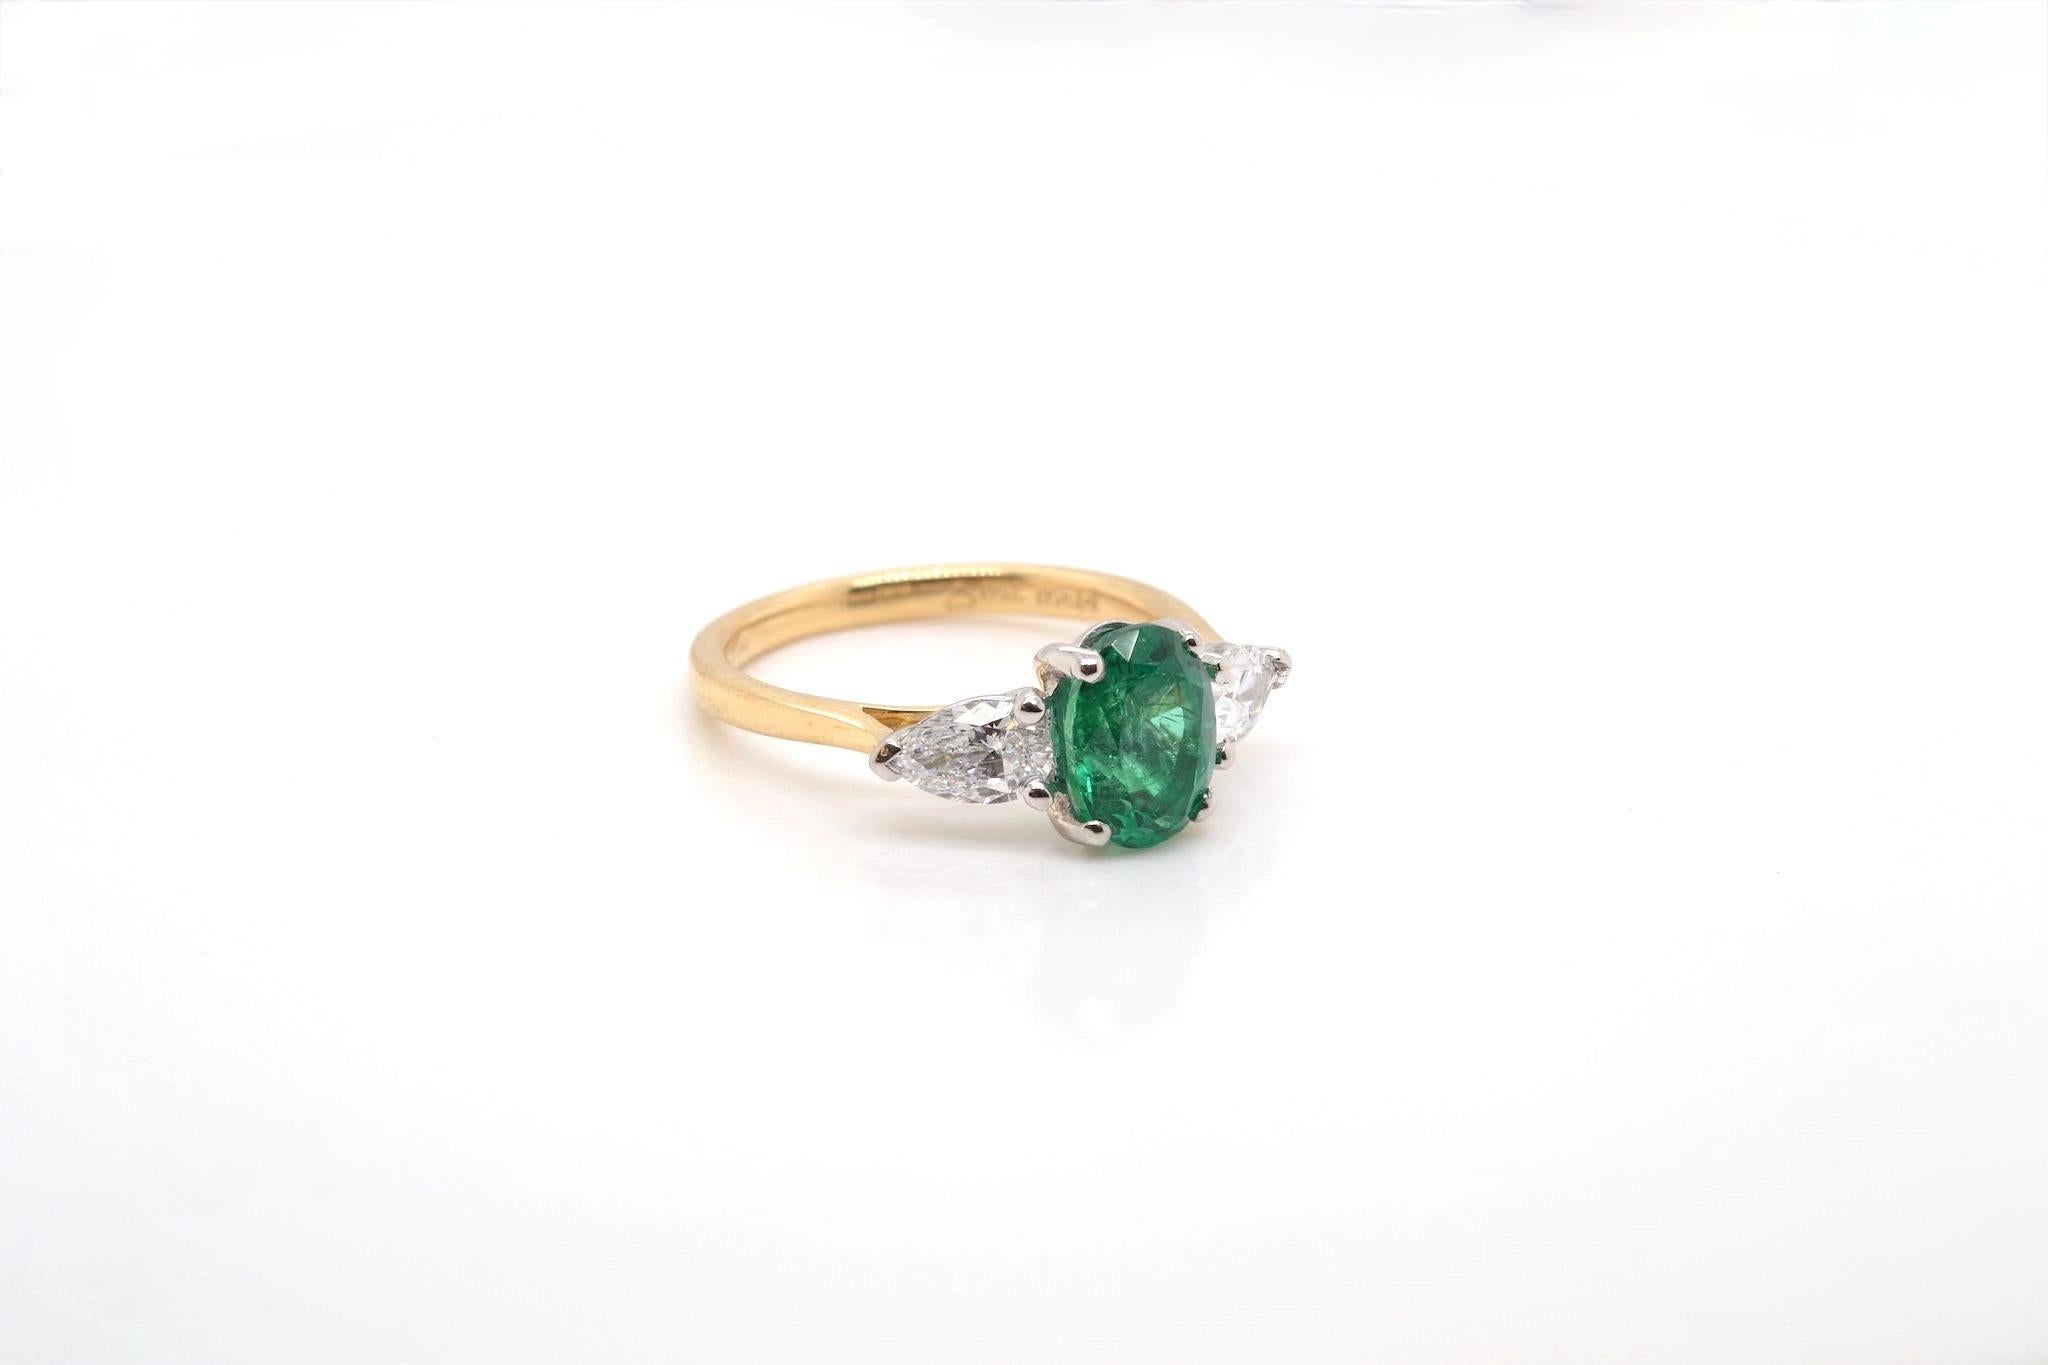 Oval Cut 1.5 carats oval emerald and diamonds ring For Sale